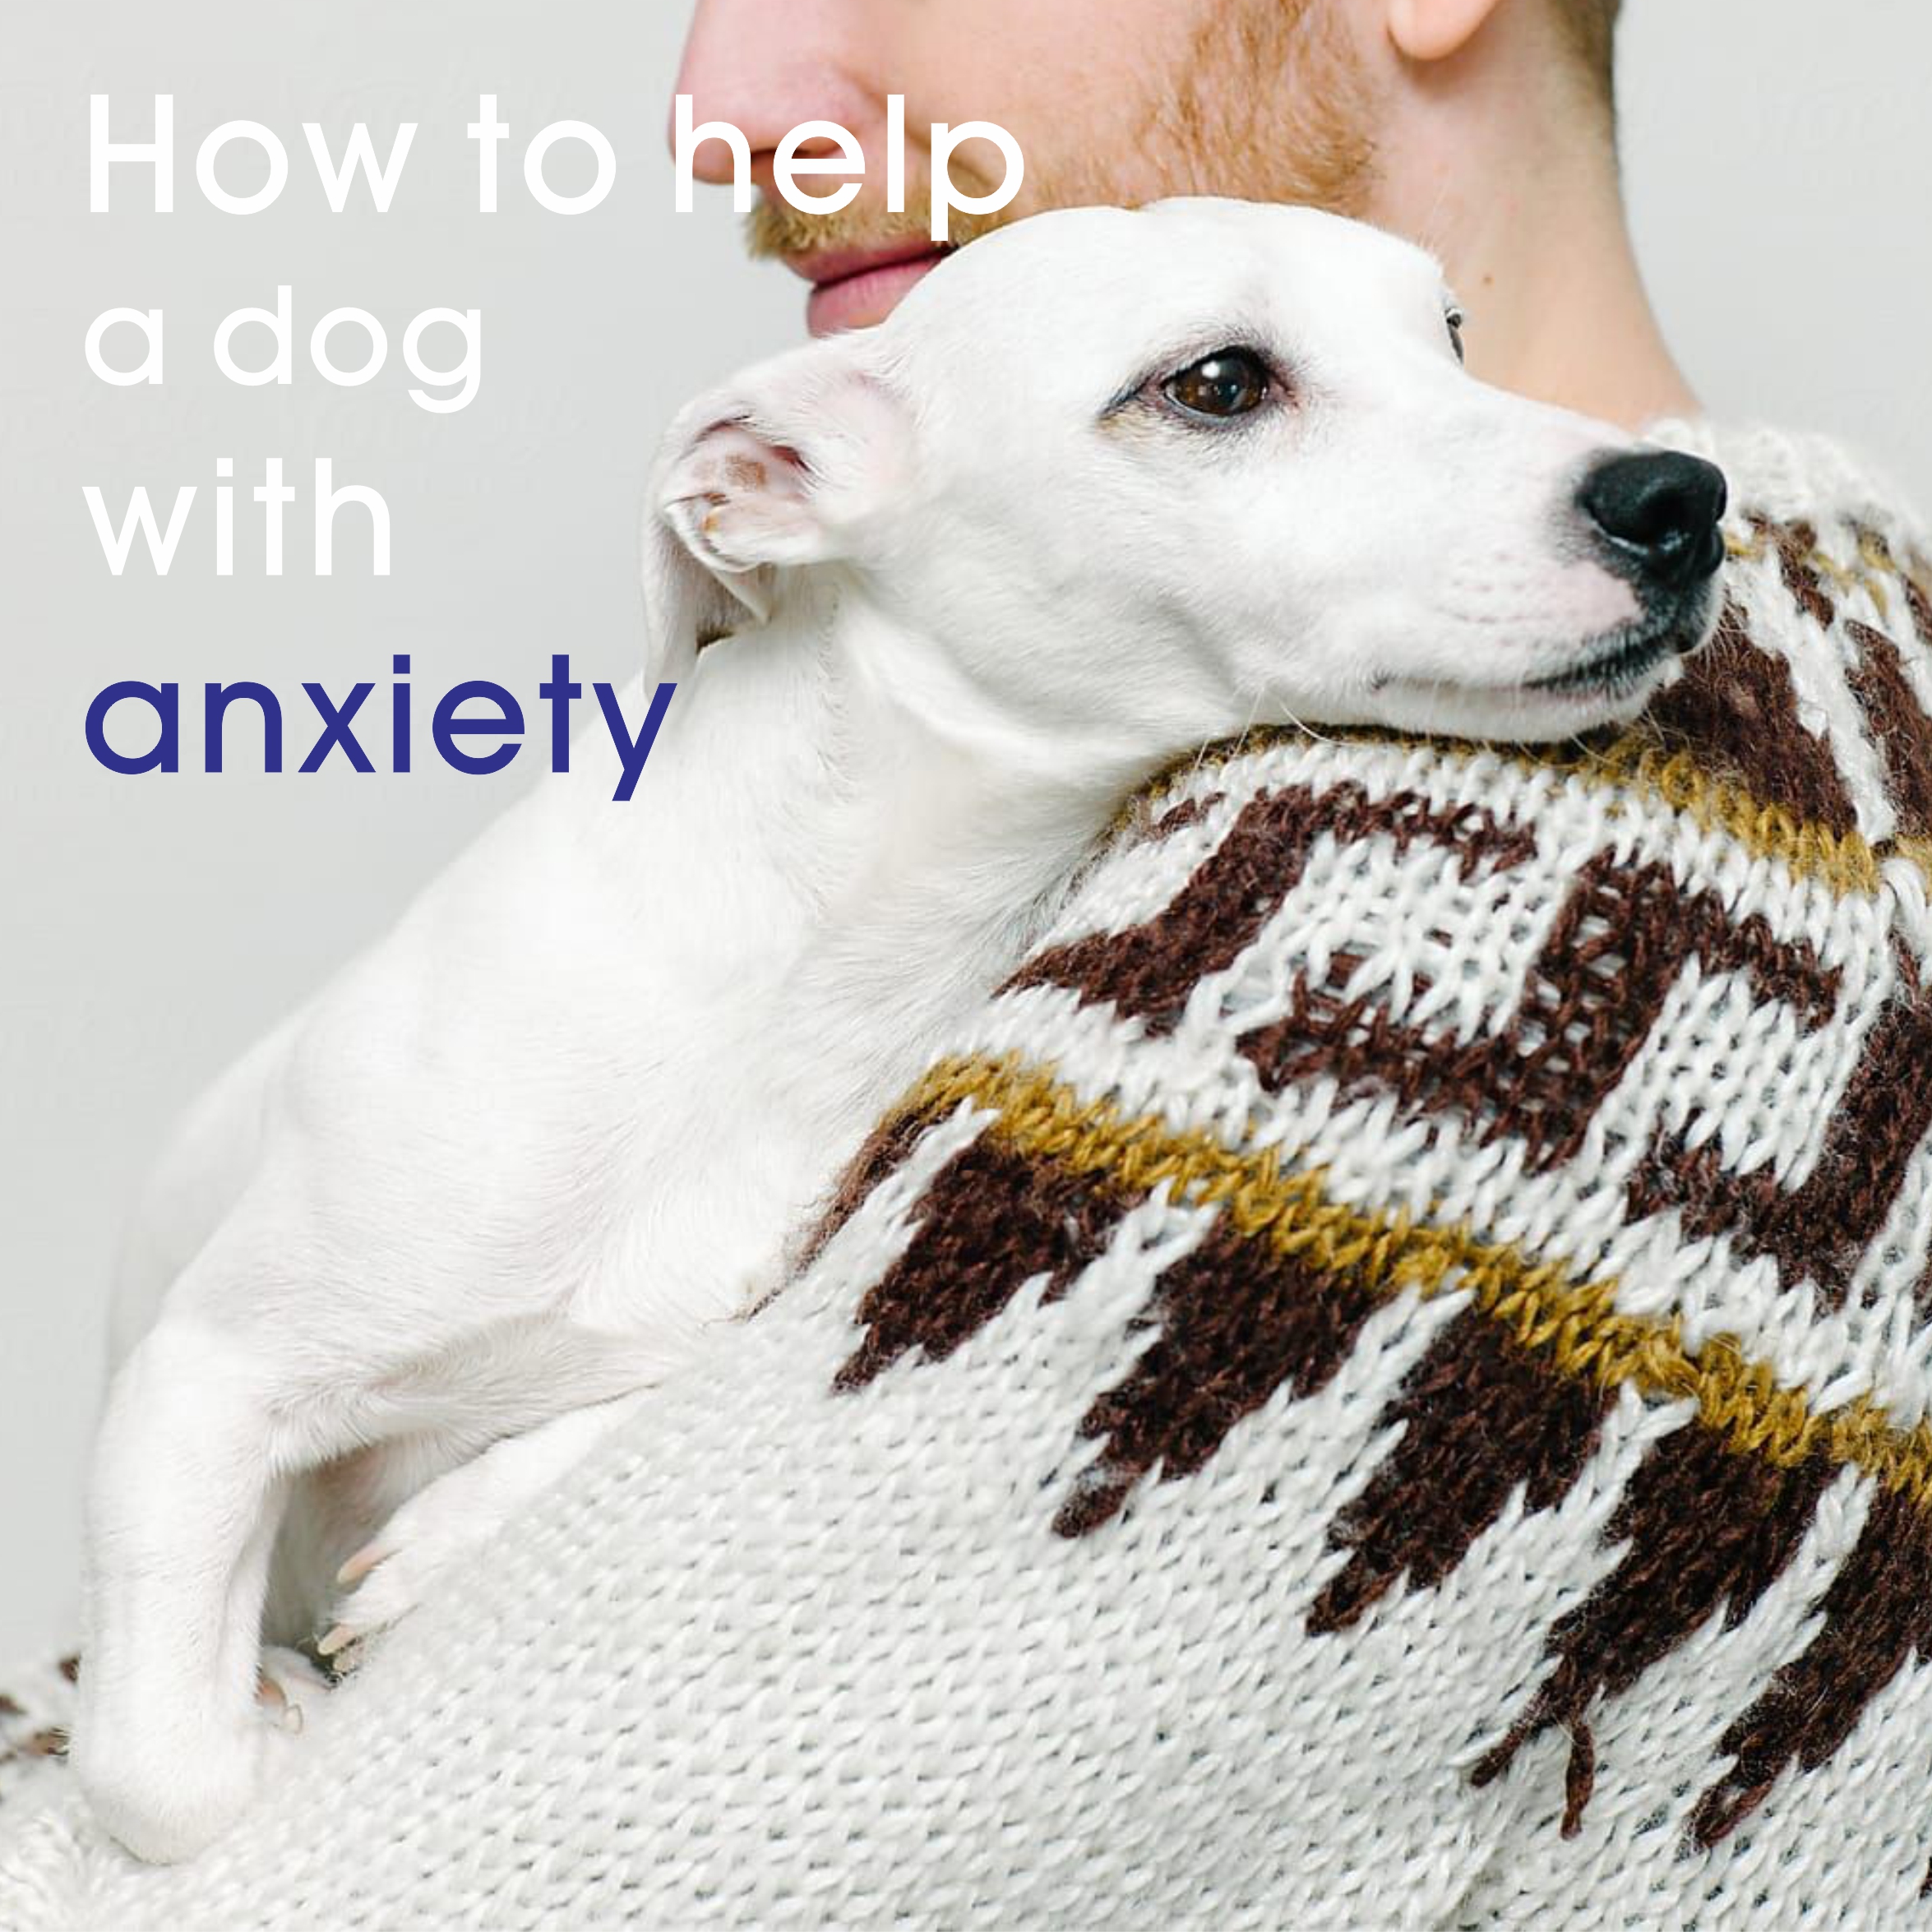 How to help a dog with anxiety